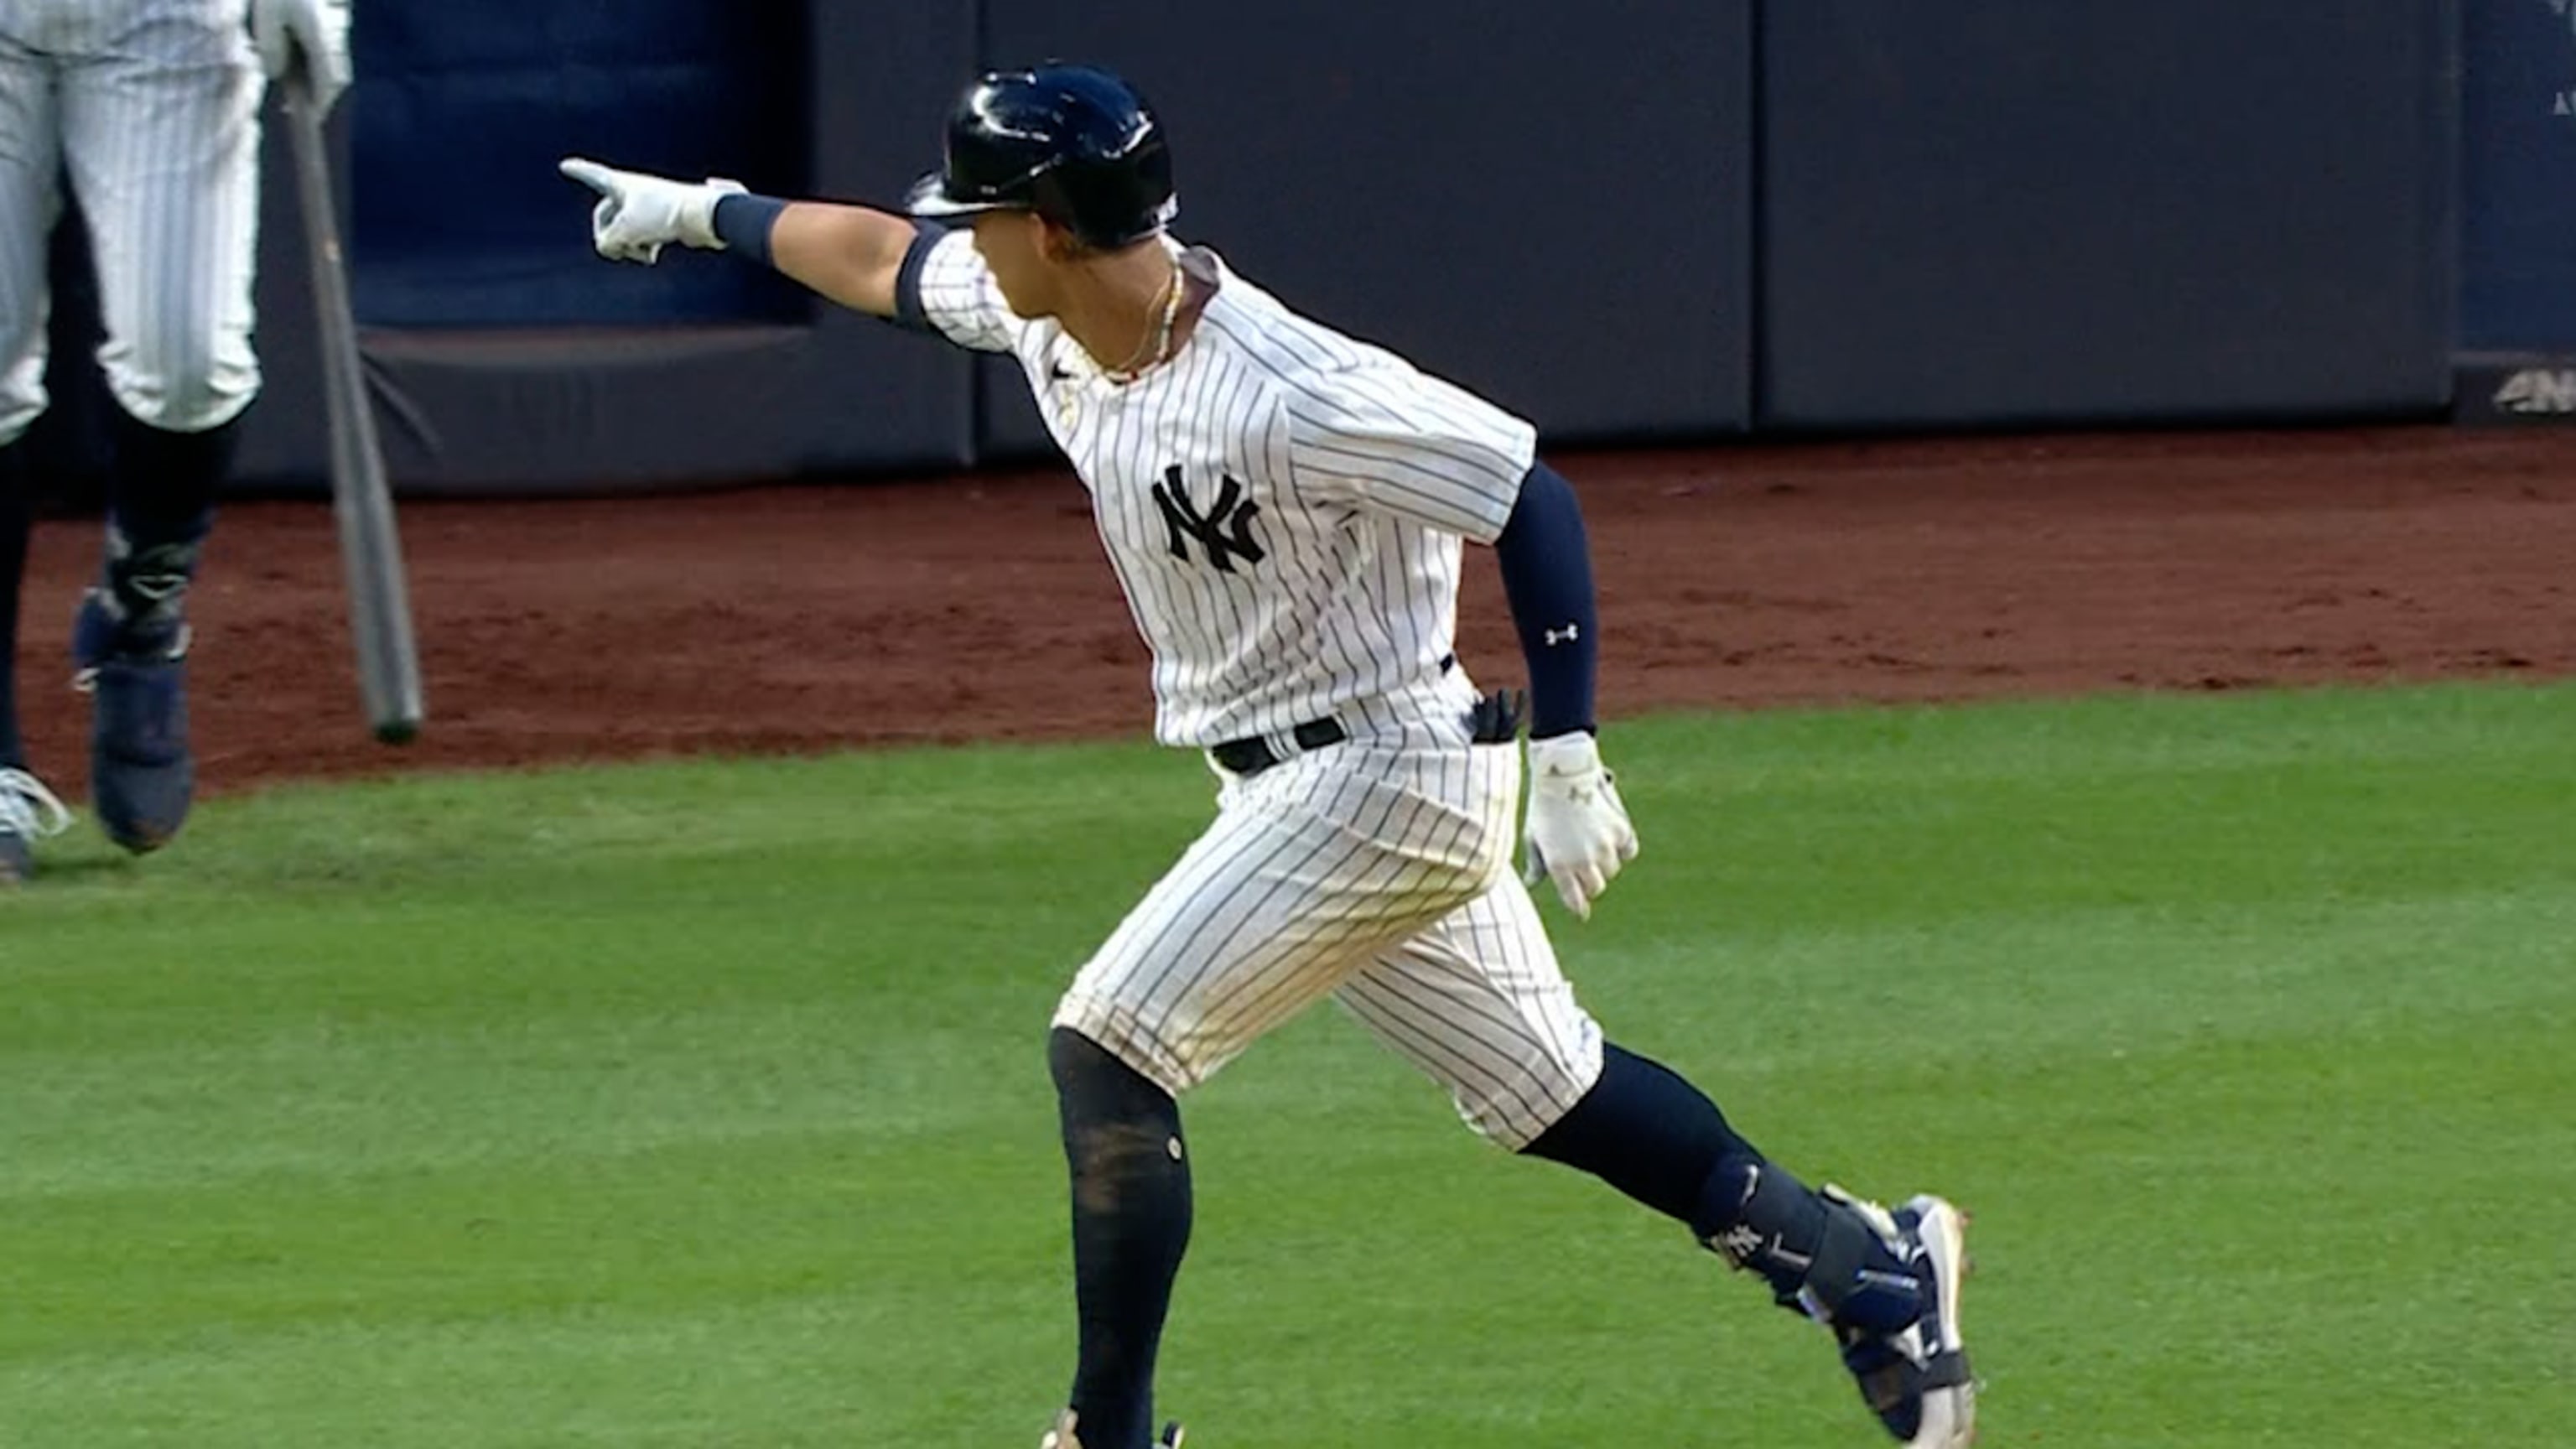 Aaron Judge: Yankees star hits homer number 55, keeping pace to